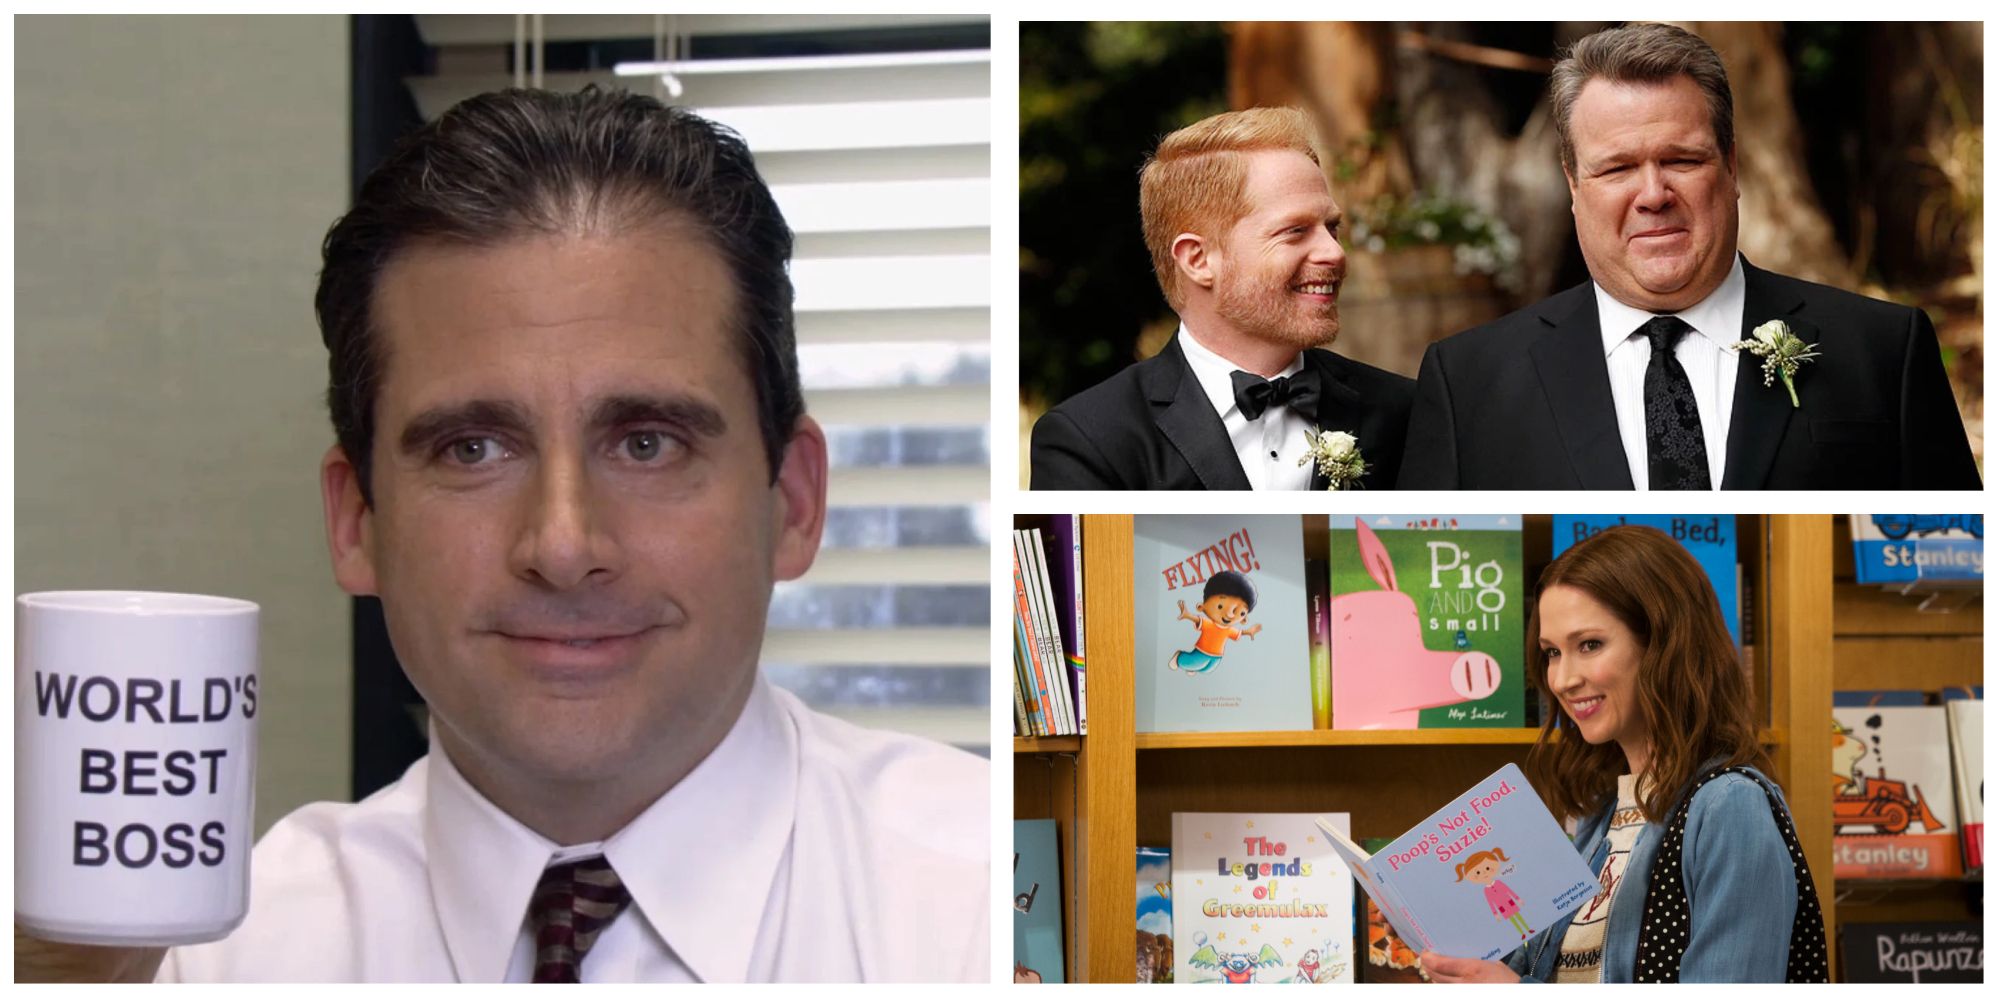 Left: Michael Scott. Top right: Cam and Mitchell from Modern Family. Bottom right: Kimmy Schmidt